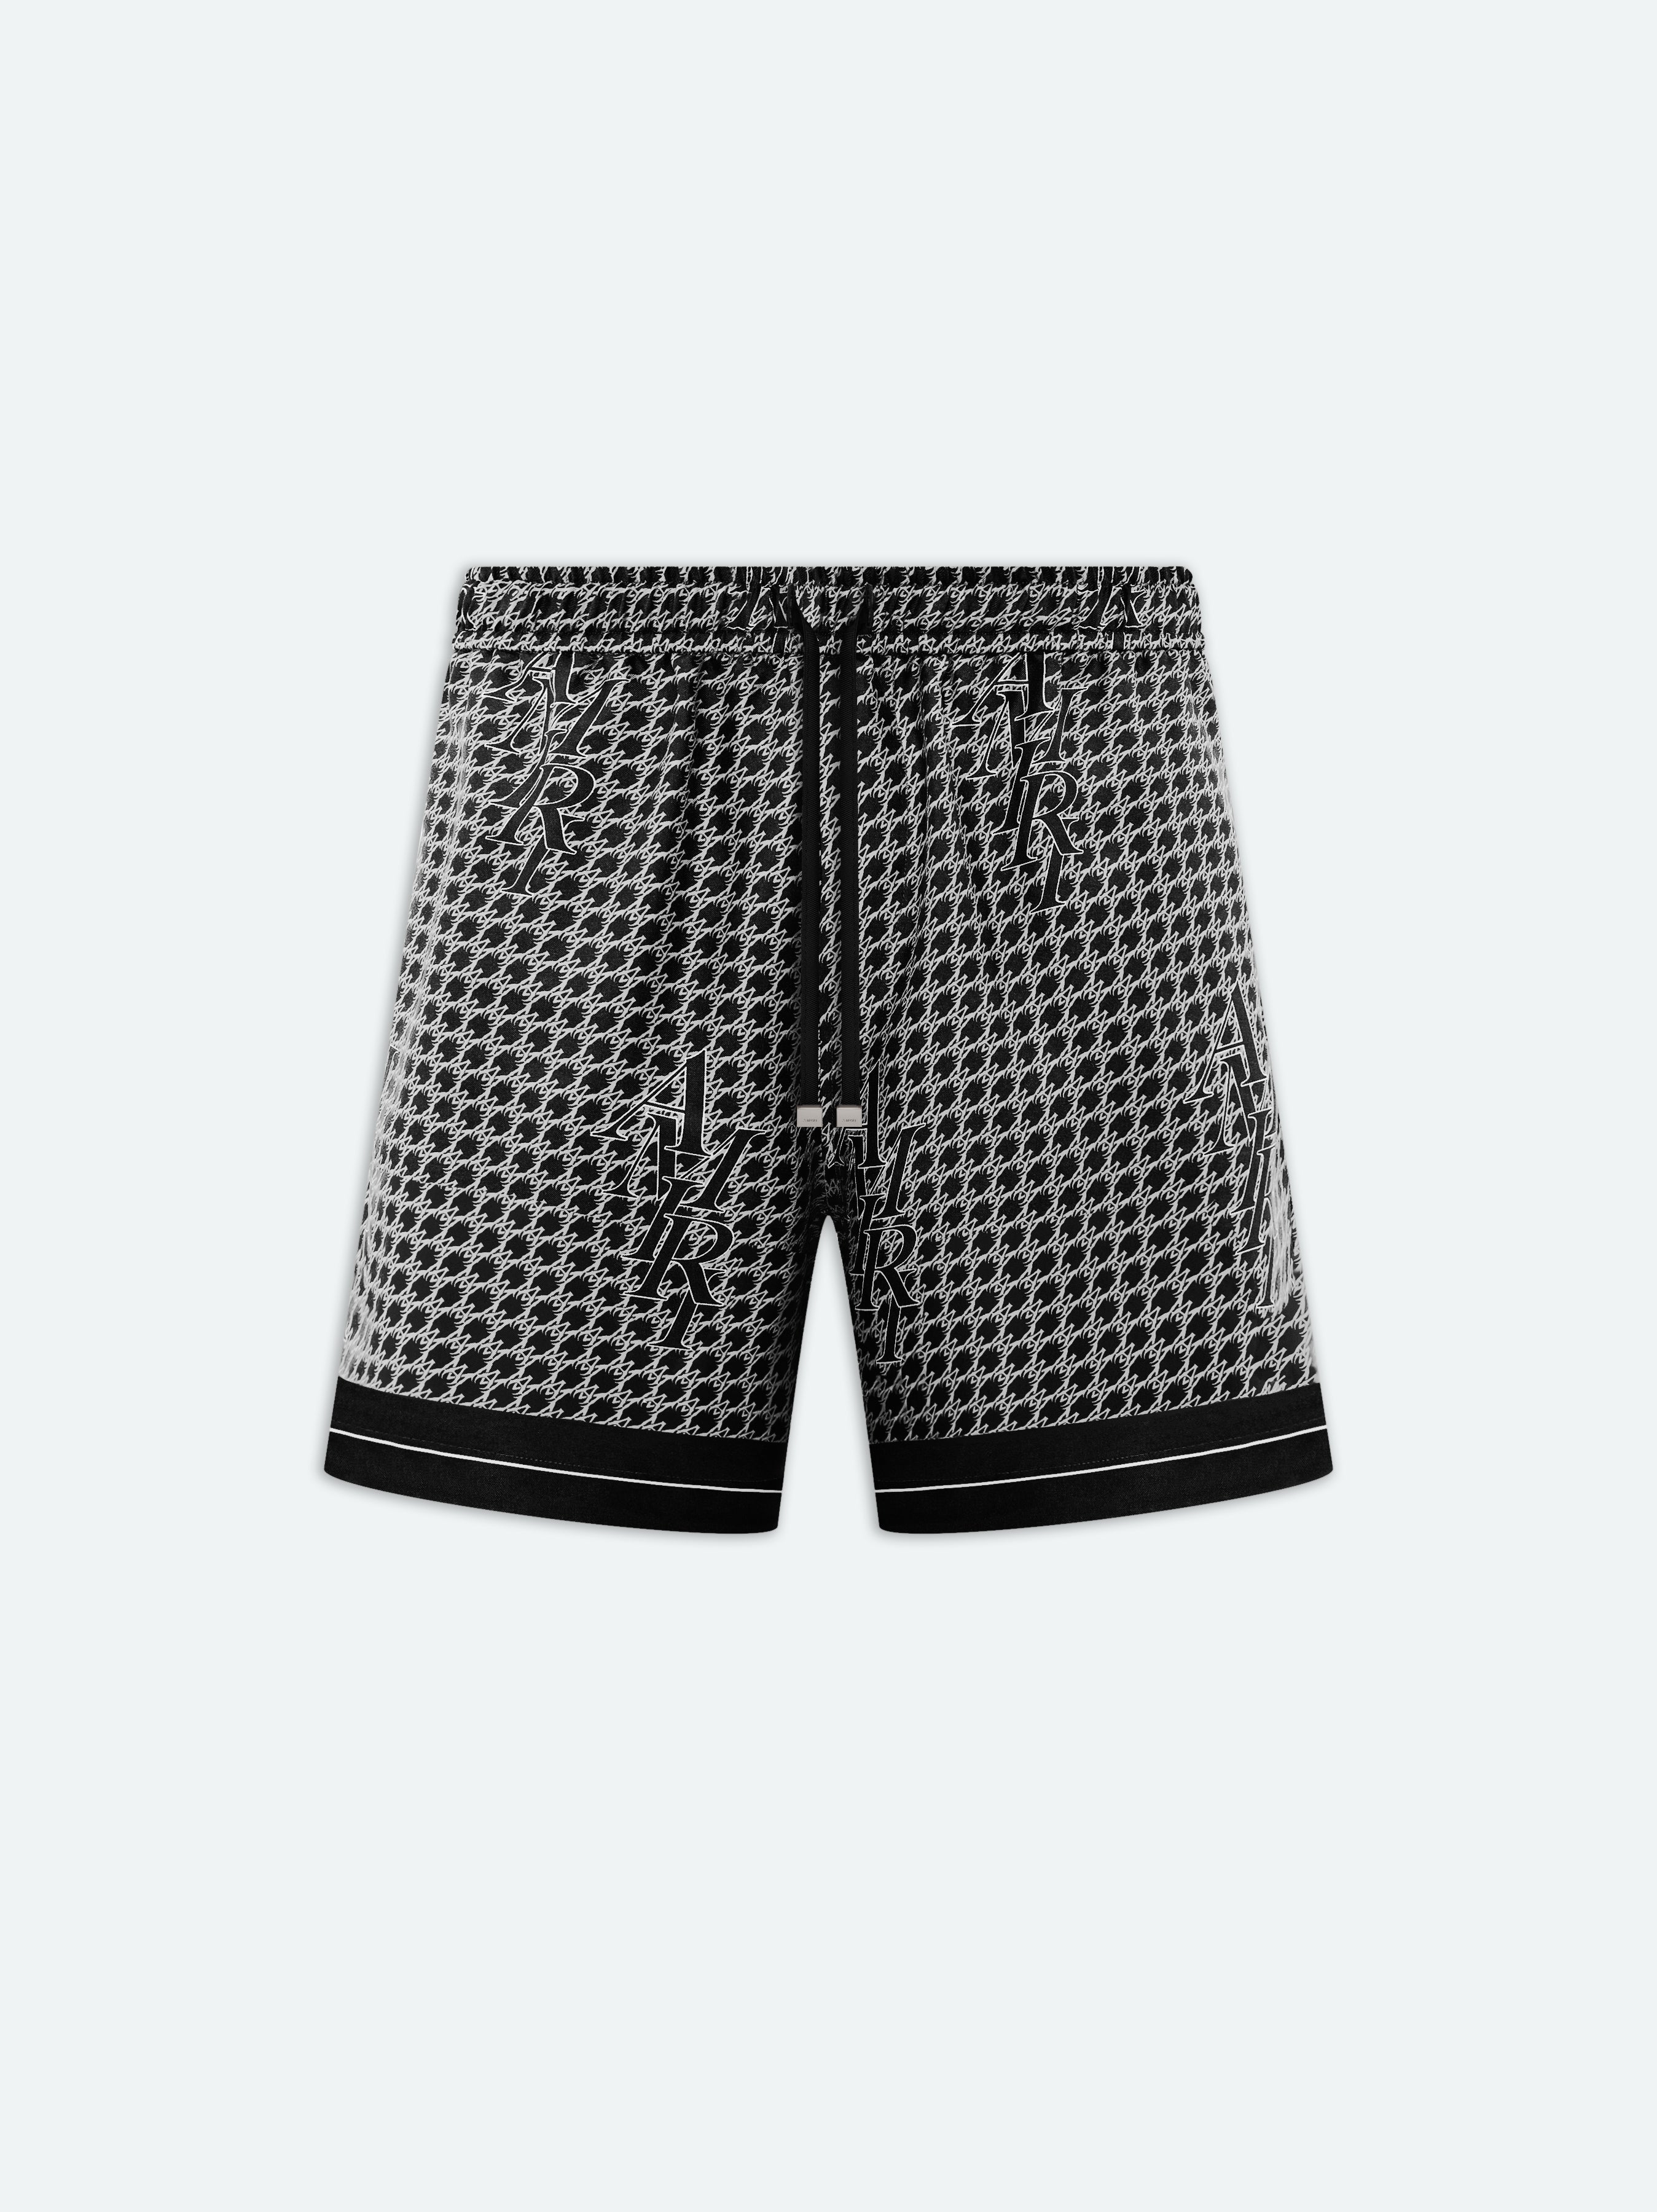 Product STAGGARD AMIRI HOUNDSTOOTH SILK SHORT - BLACK-SILK featured image